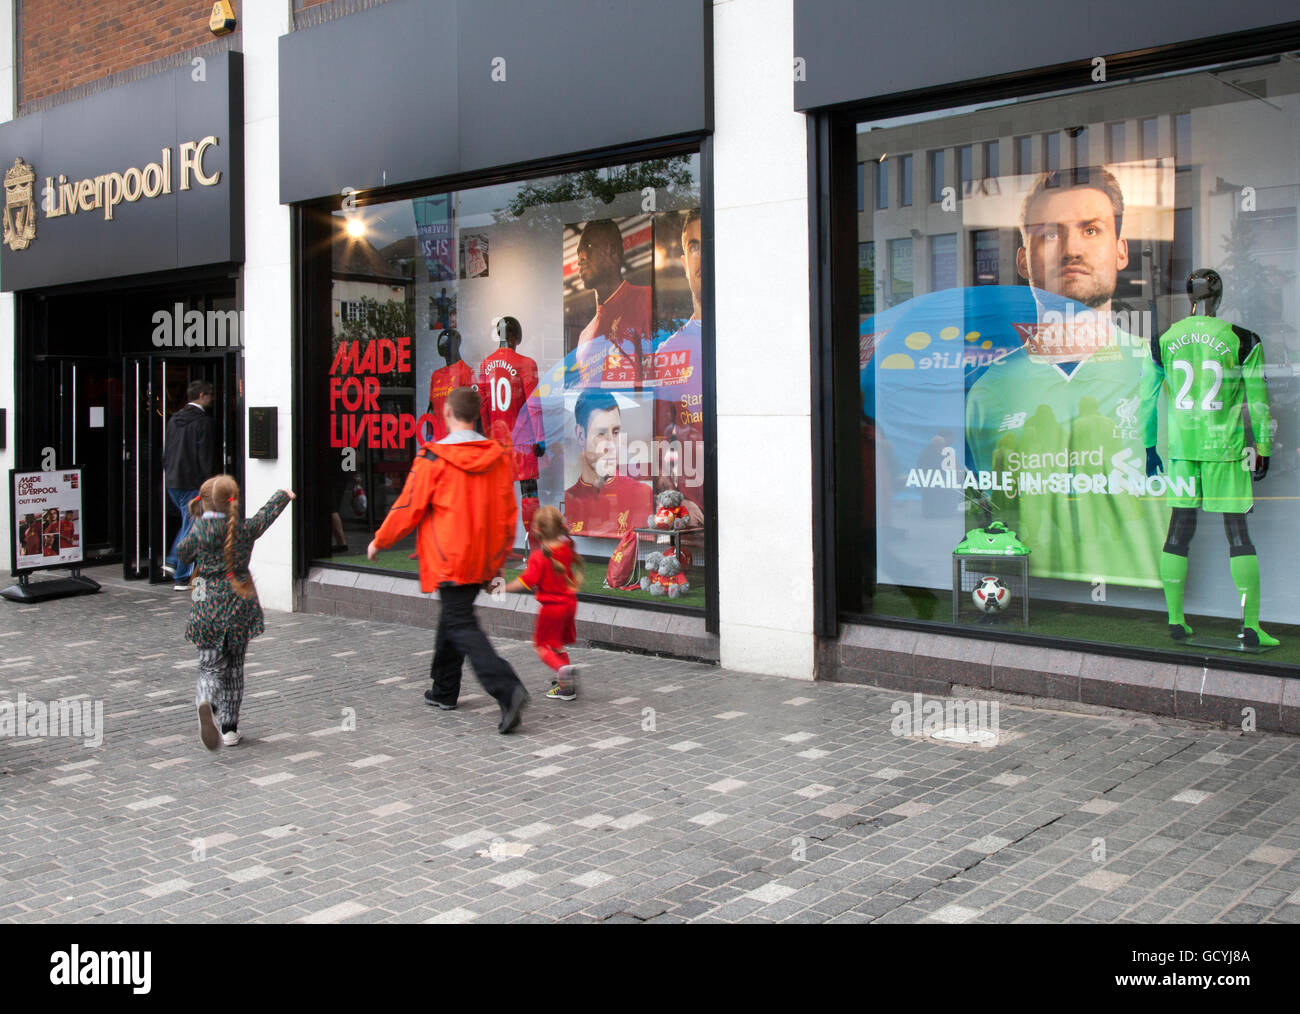 Liverpool FC official supporters retail store for replica kit in Williamson Square,  Merseyside, UK Liverpools business district. Stock Photo